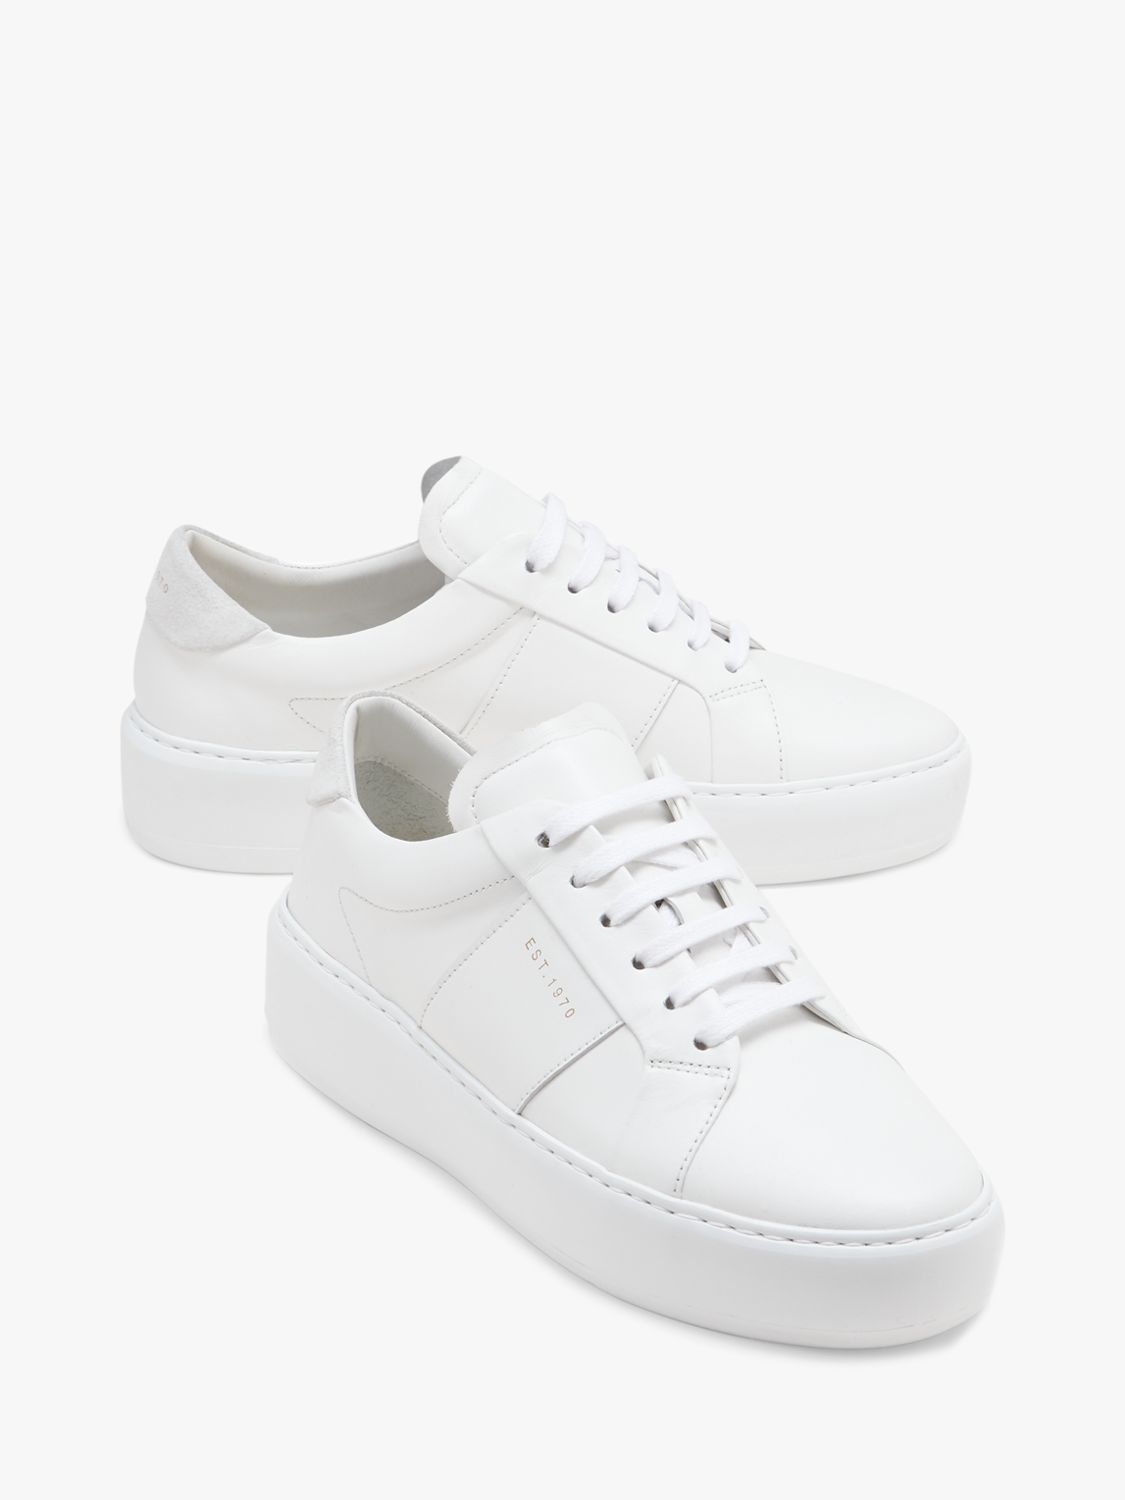 Buy Jigsaw Riva Leather Platform Trainers, White Online at johnlewis.com